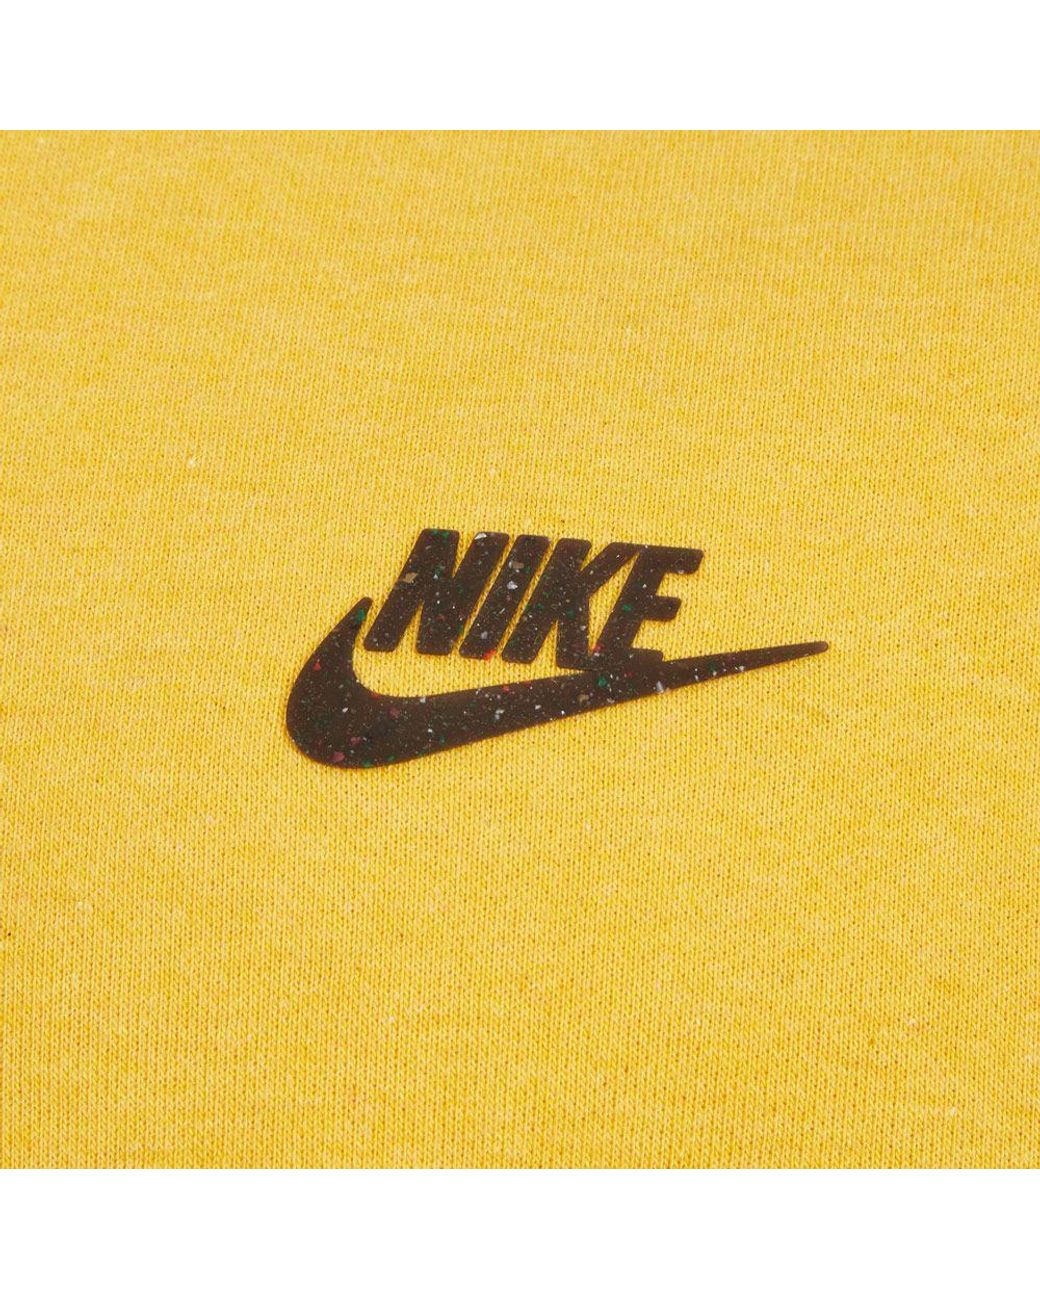 Nike Cotton Hoodie in Yellow for Men | Lyst